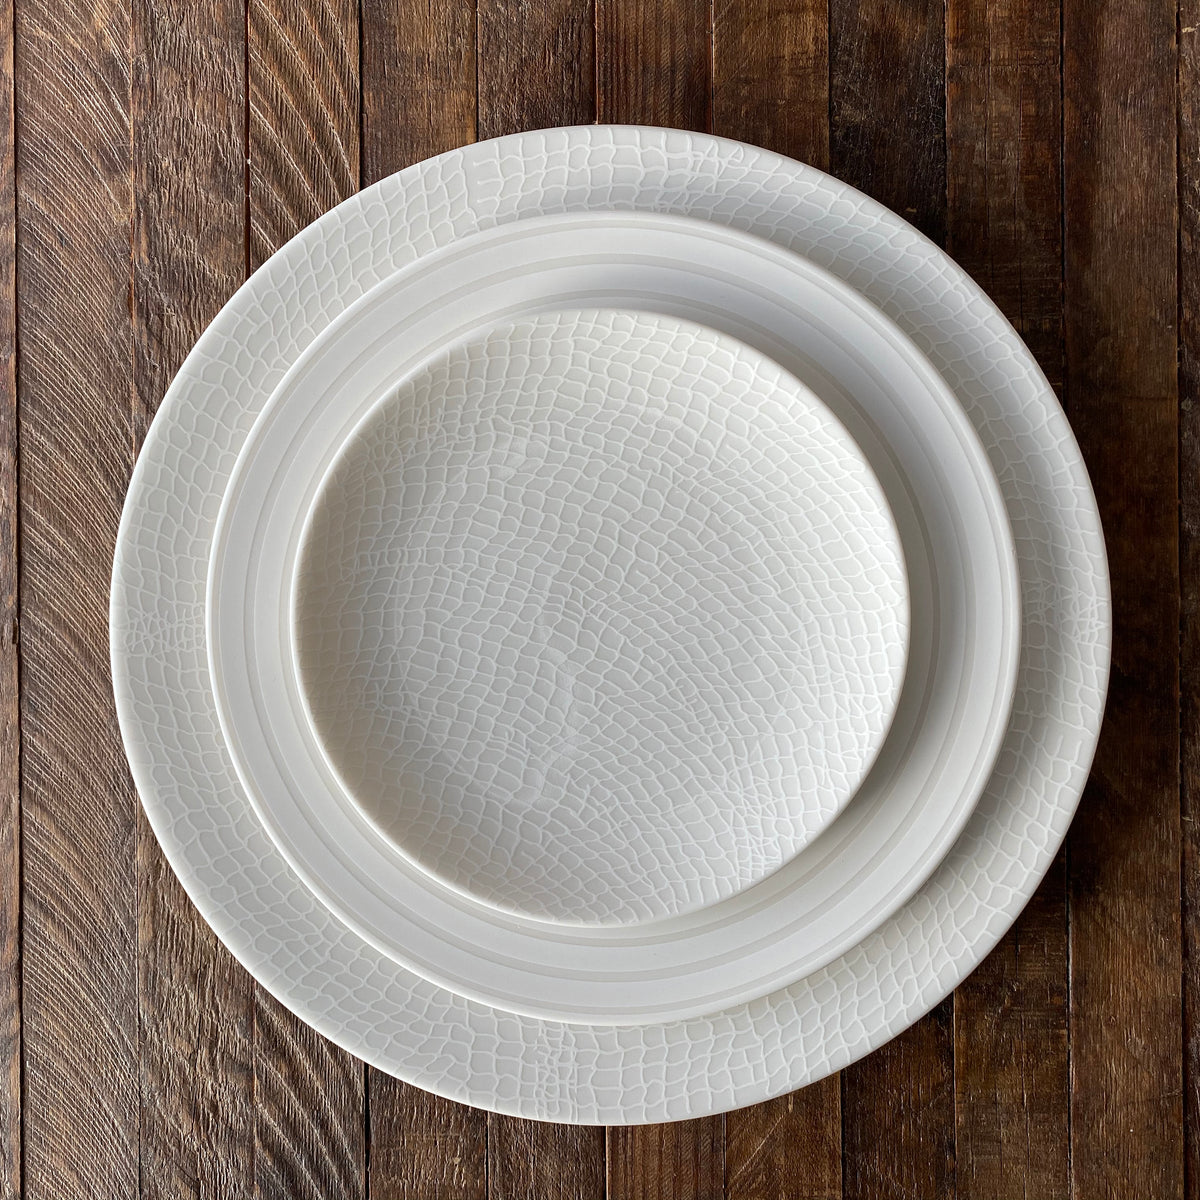 A small white Catch Canapé Plate on a wooden table by Caskata Artisanal Home.